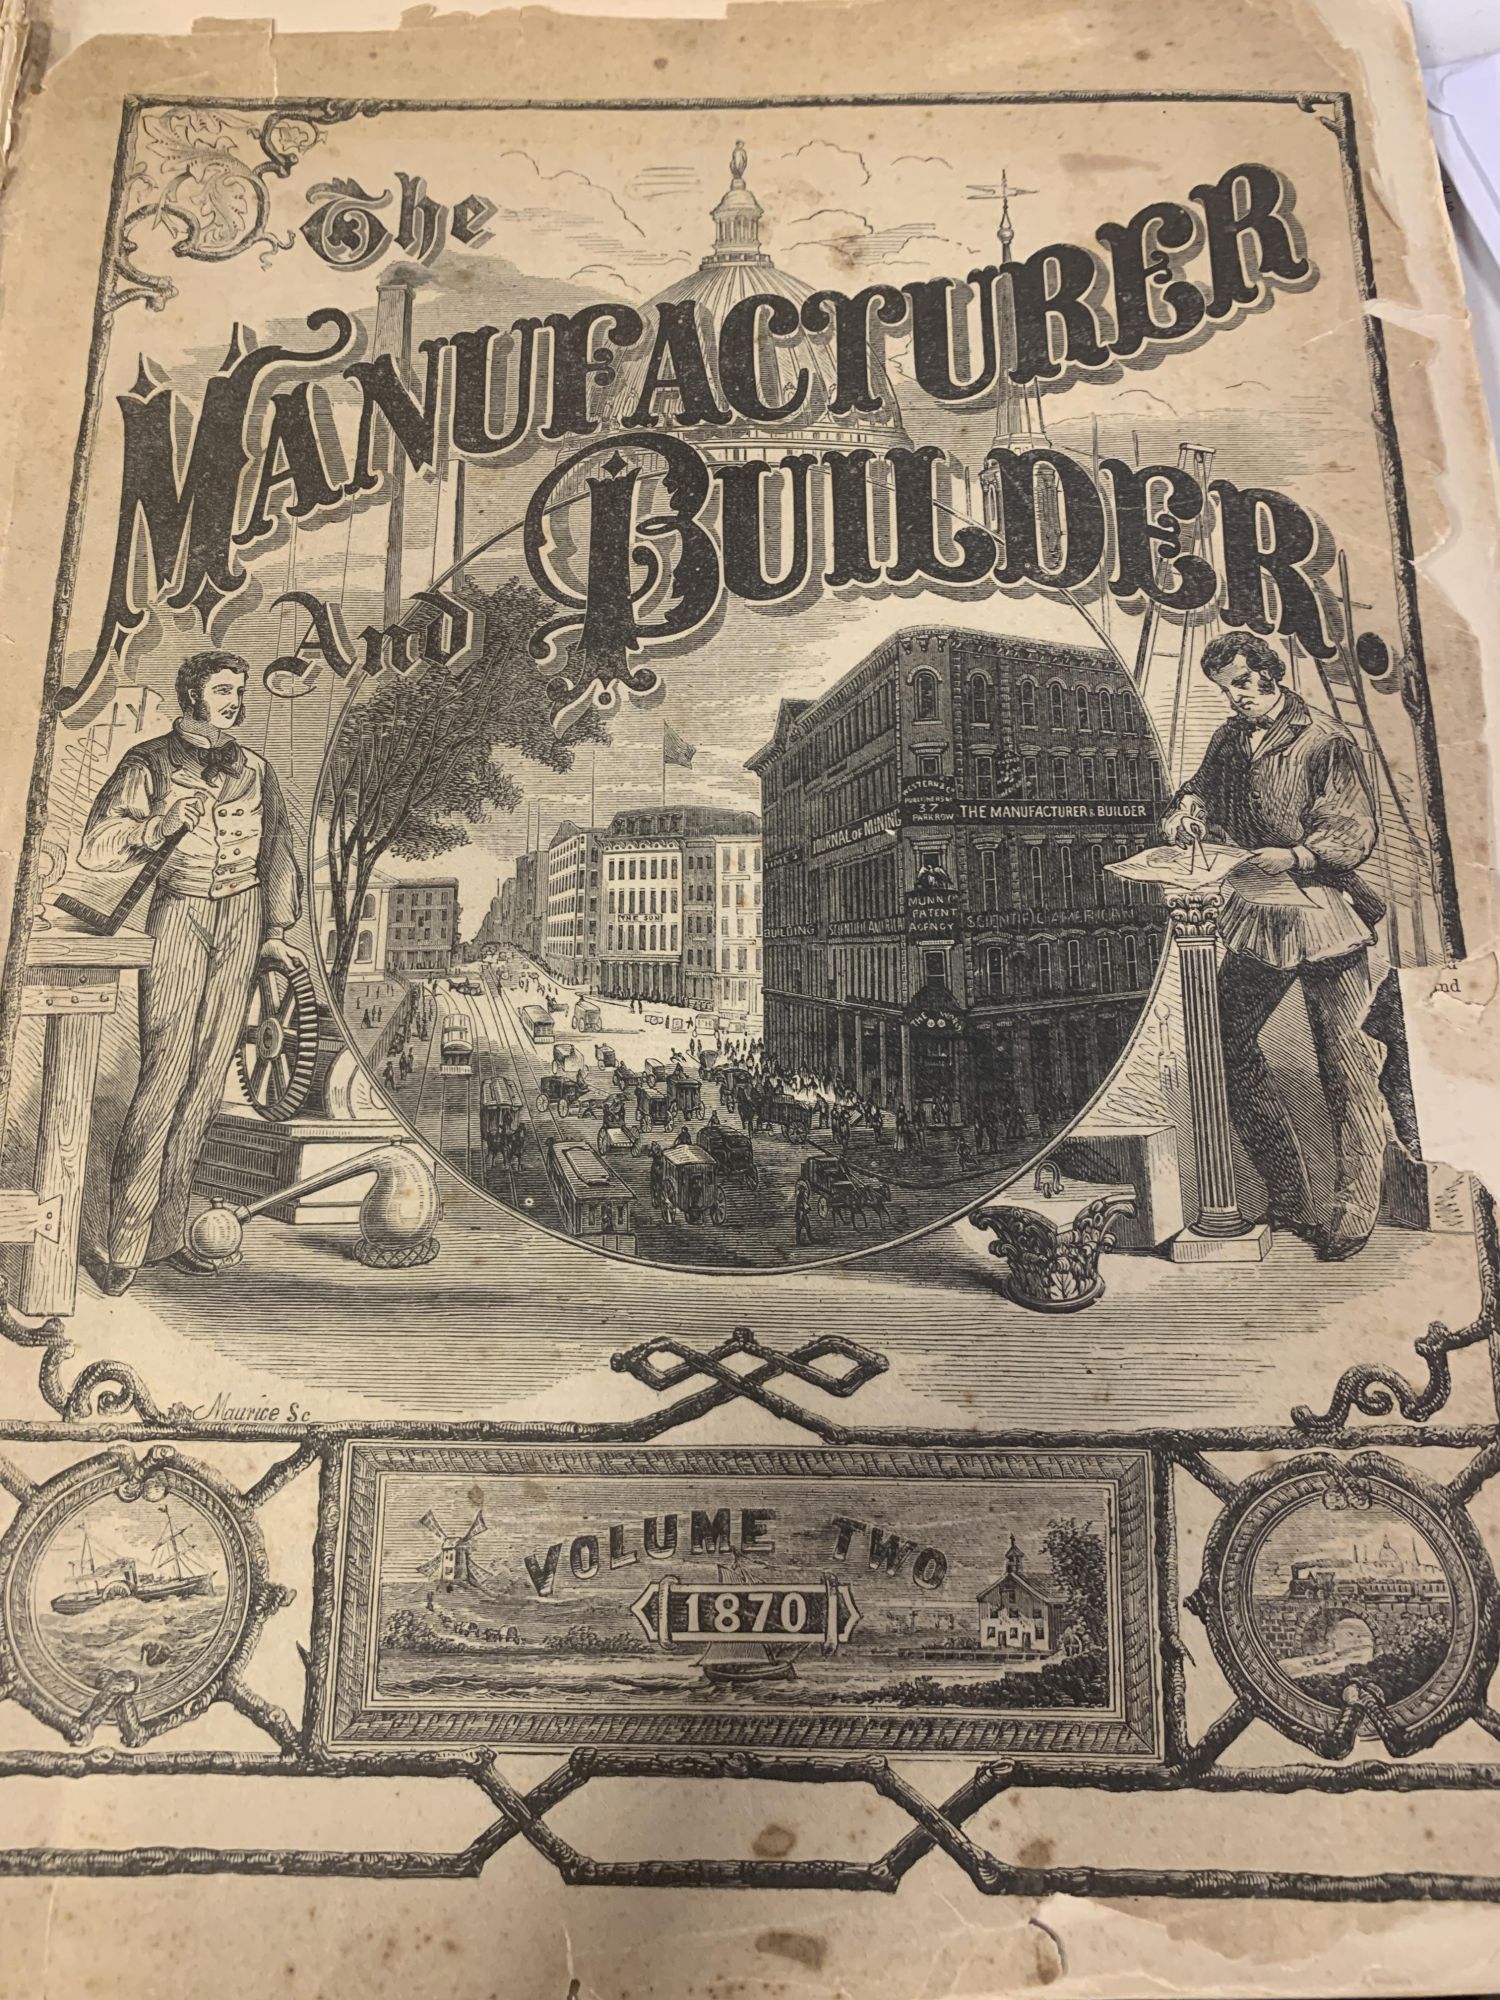 Western and Company - The Manufacturer and Builder: A Practical Journal of Industrial Progress Volume Two 1870. (Nos. 1 - 12: January Through December, 1870)